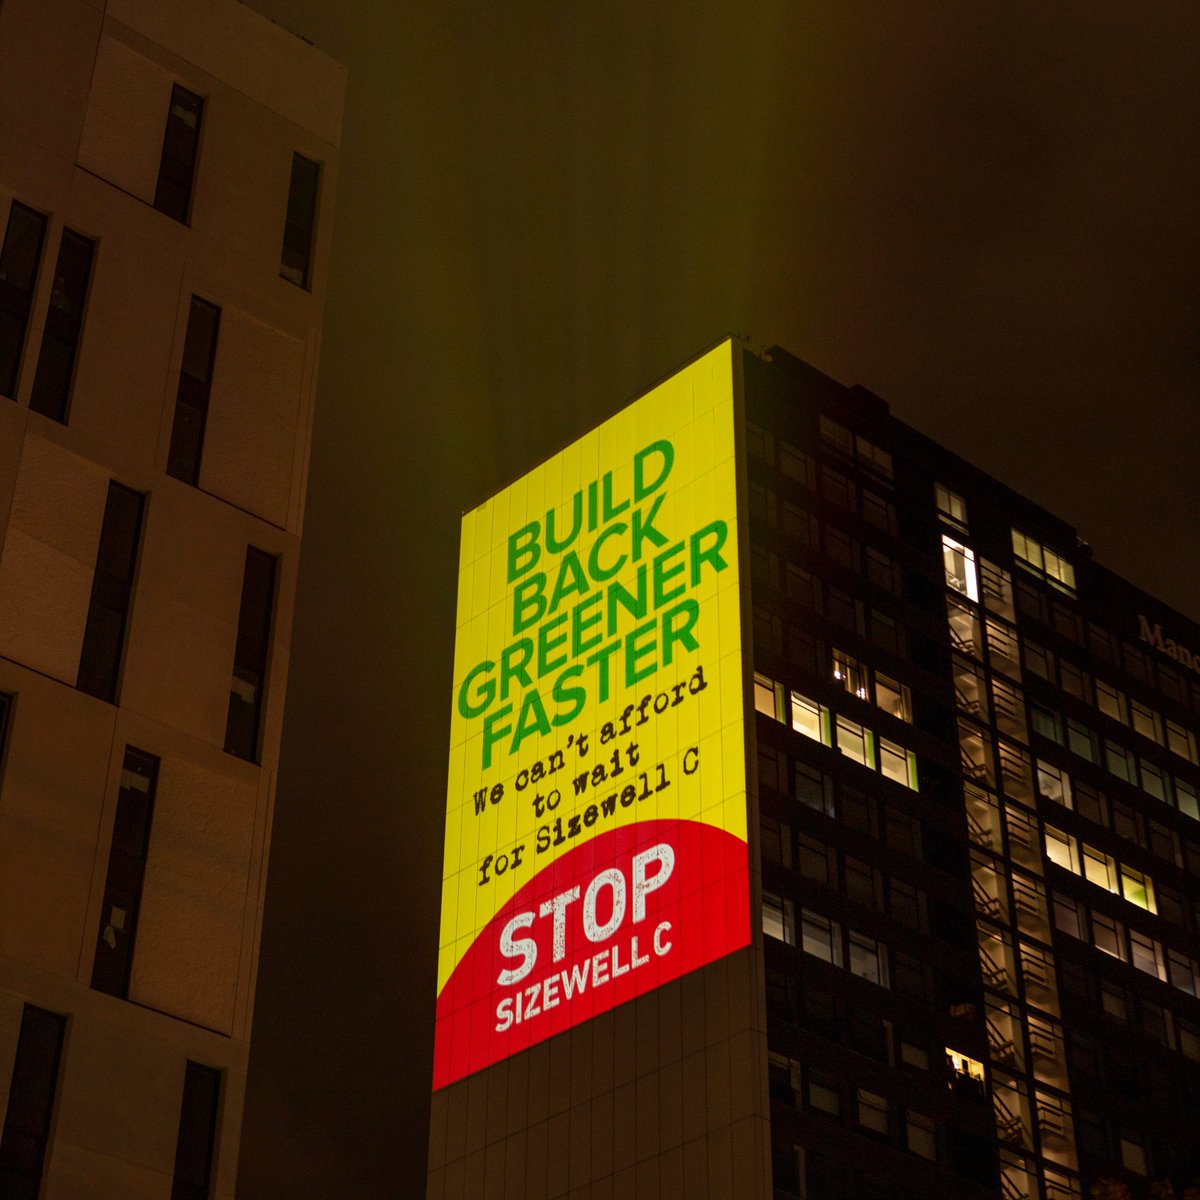 Last night, Manchester, close to the #ToryPartyConference, messages for @BorisJohnson @RishiSunak & @KwasiKwarteng: Don't Buy #SizewellC it's too damaging, too costly, too risky. #BuildBackGreener & faster with #renewables, storage, clean heat & energy efficiency #StopSizewellC